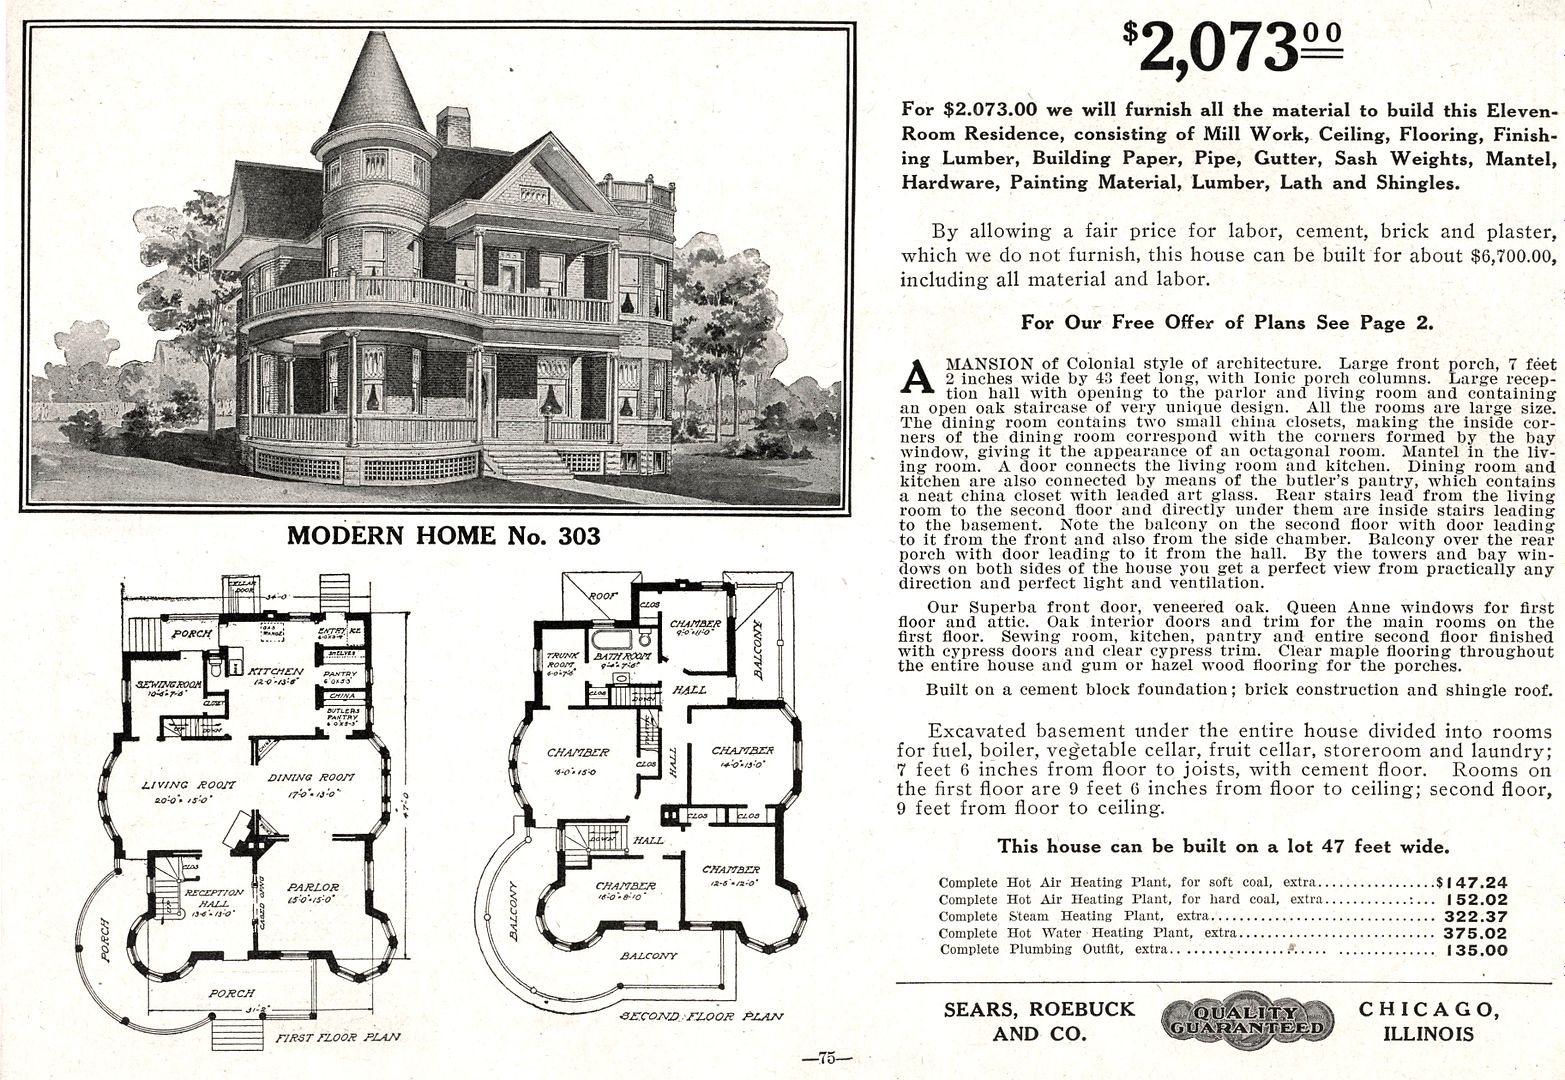 As you can see from the catalog page, this was quite a house!